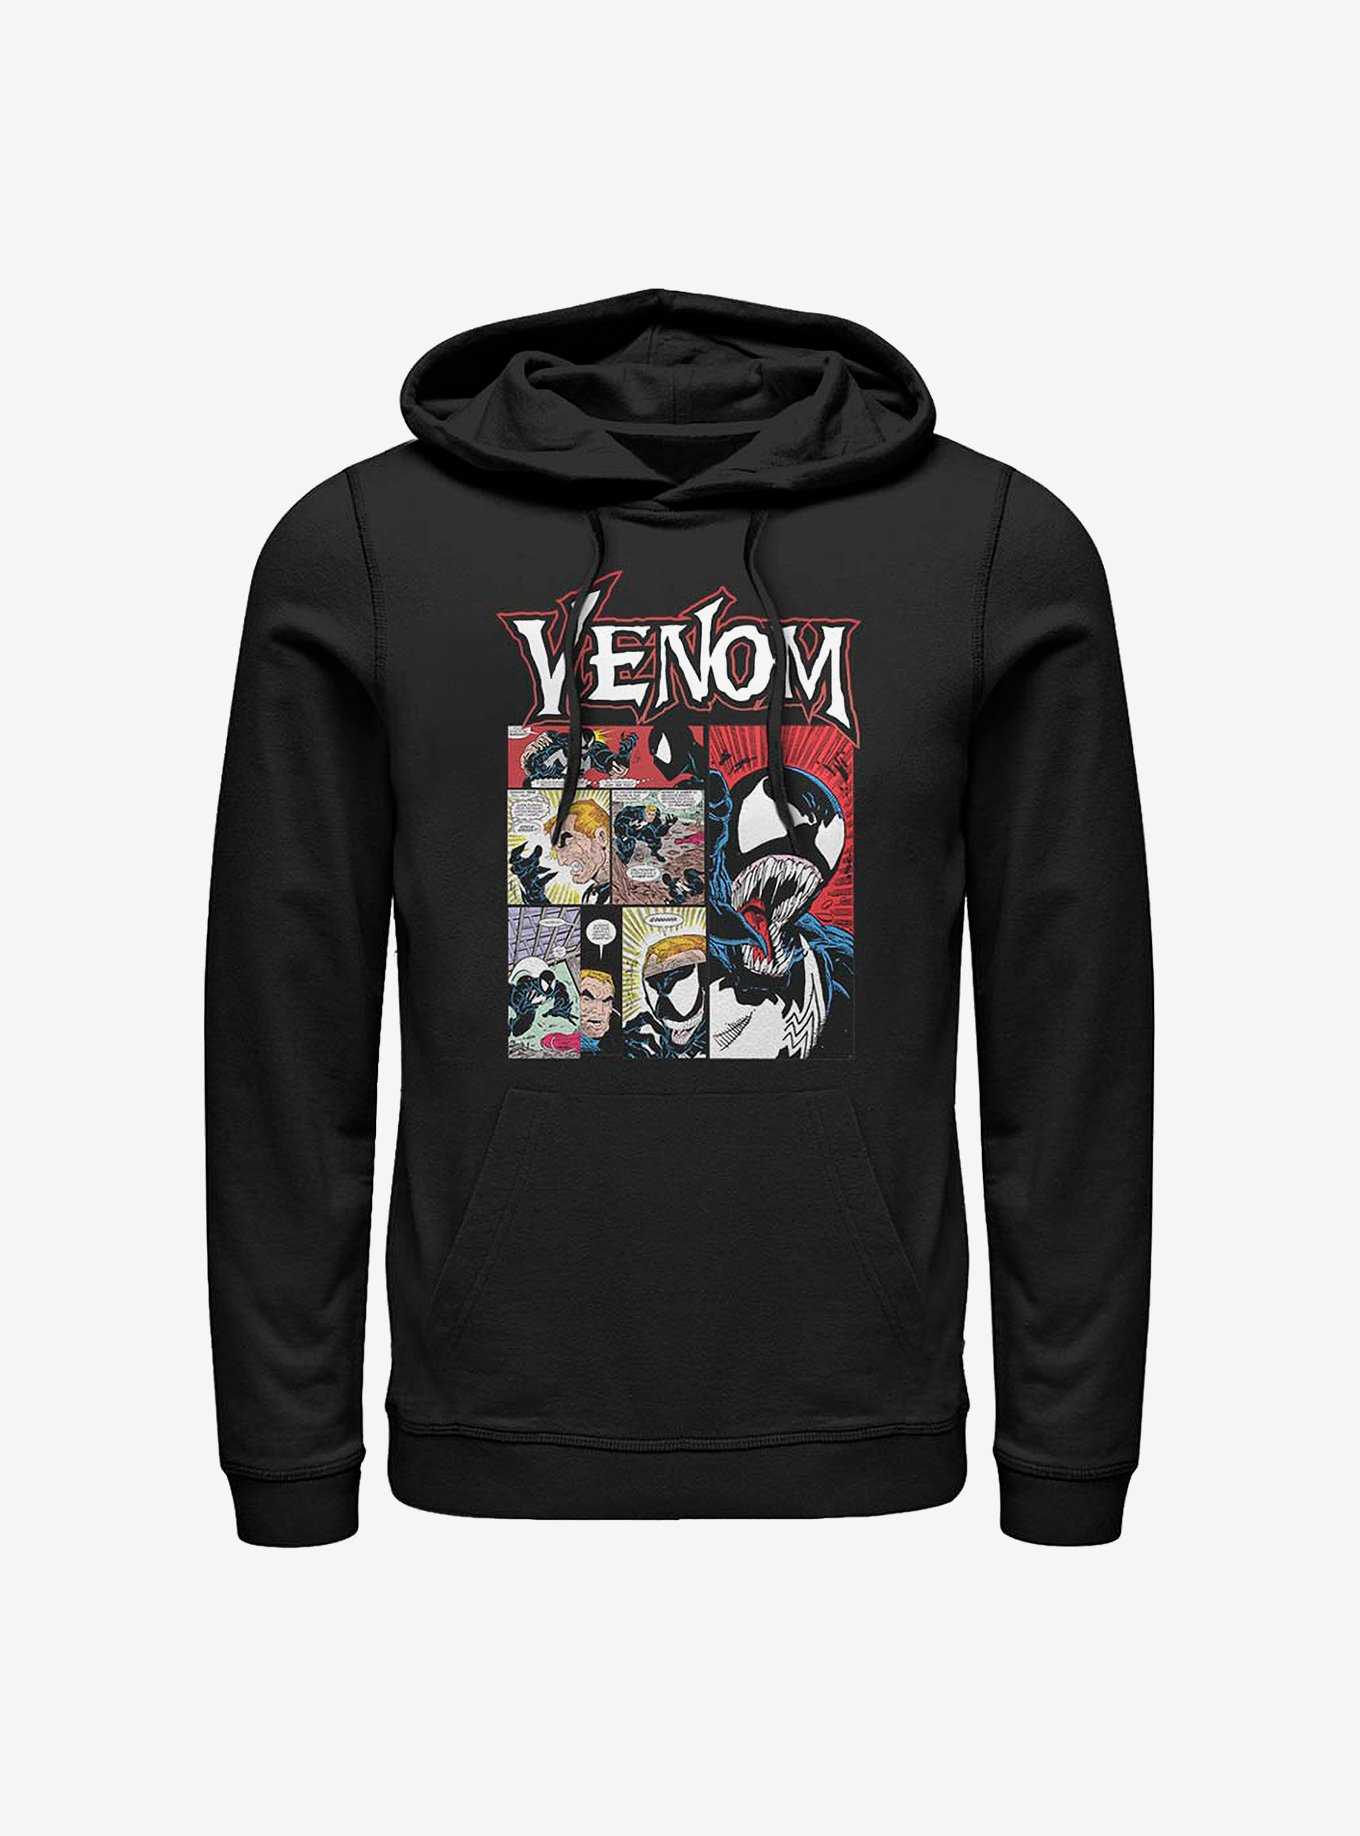 Marvel Venom: Let There Be Carnage Whom The Bell Tolls Hoodie, , hi-res